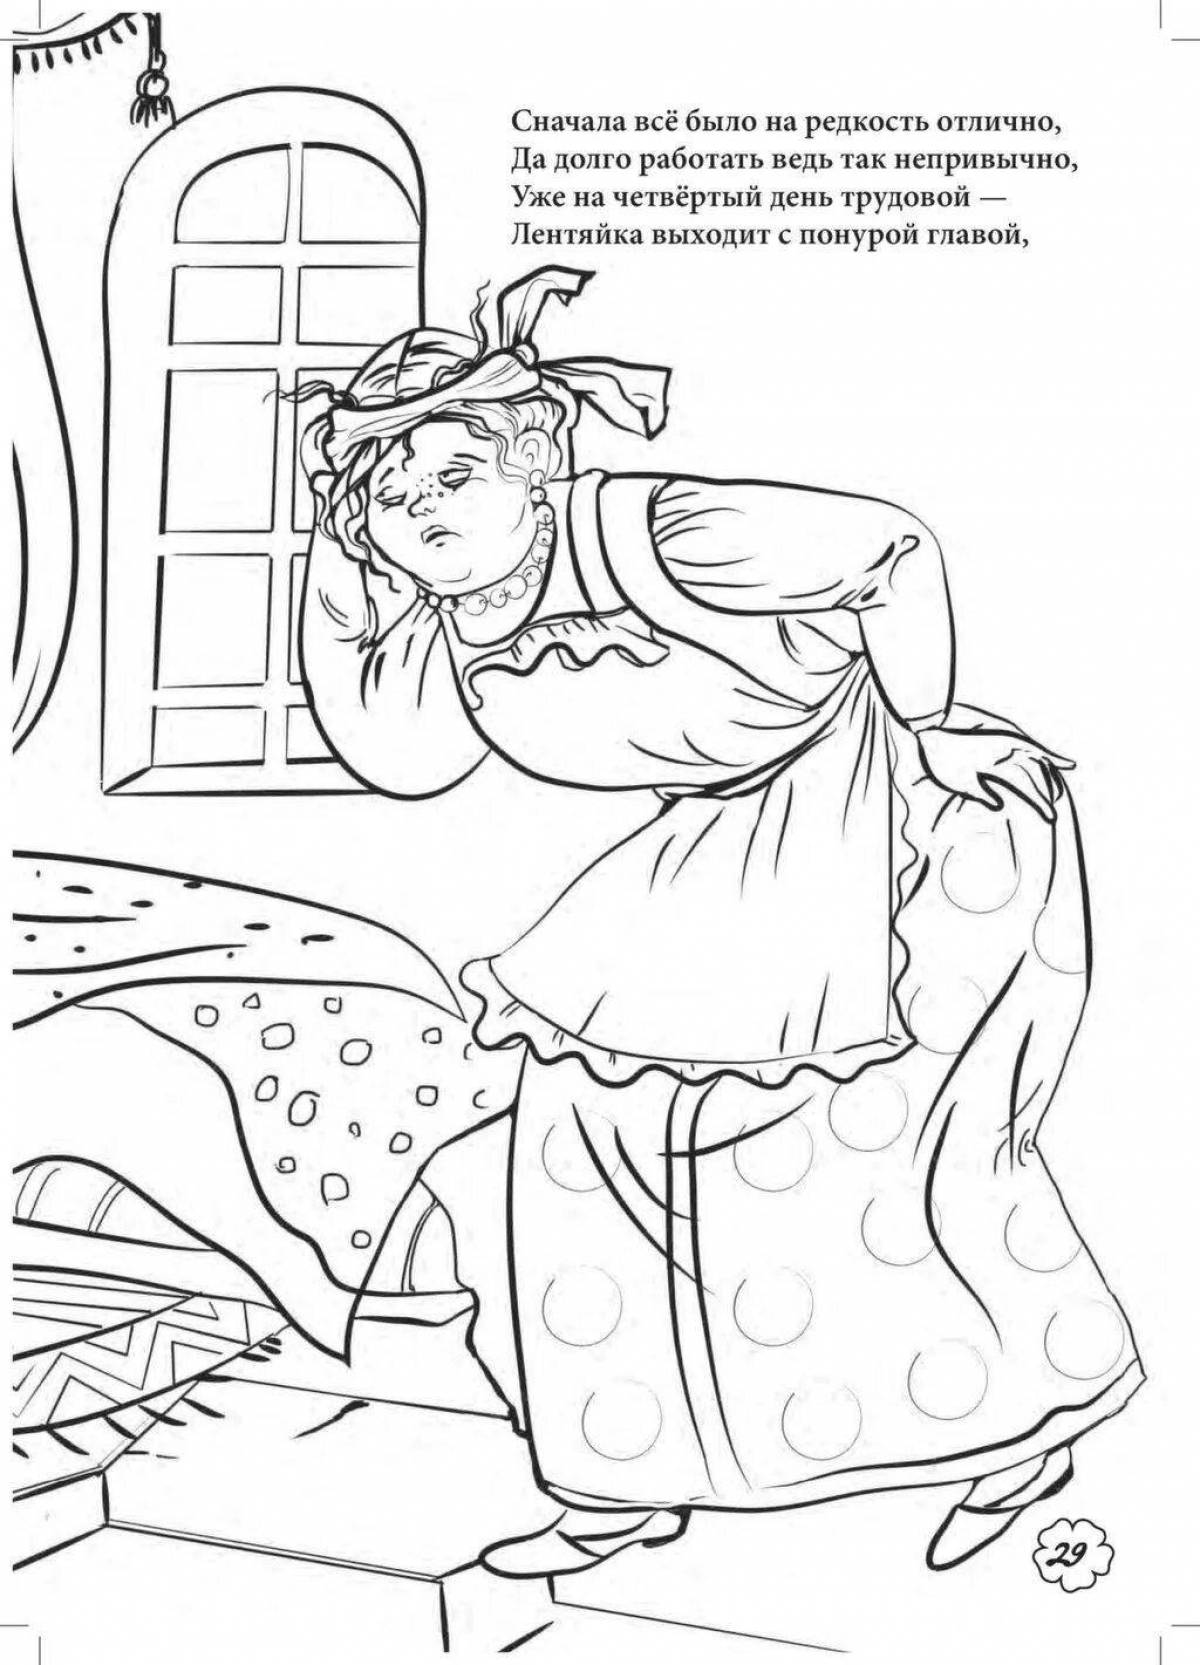 Coloring page exquisite lady snowstorm